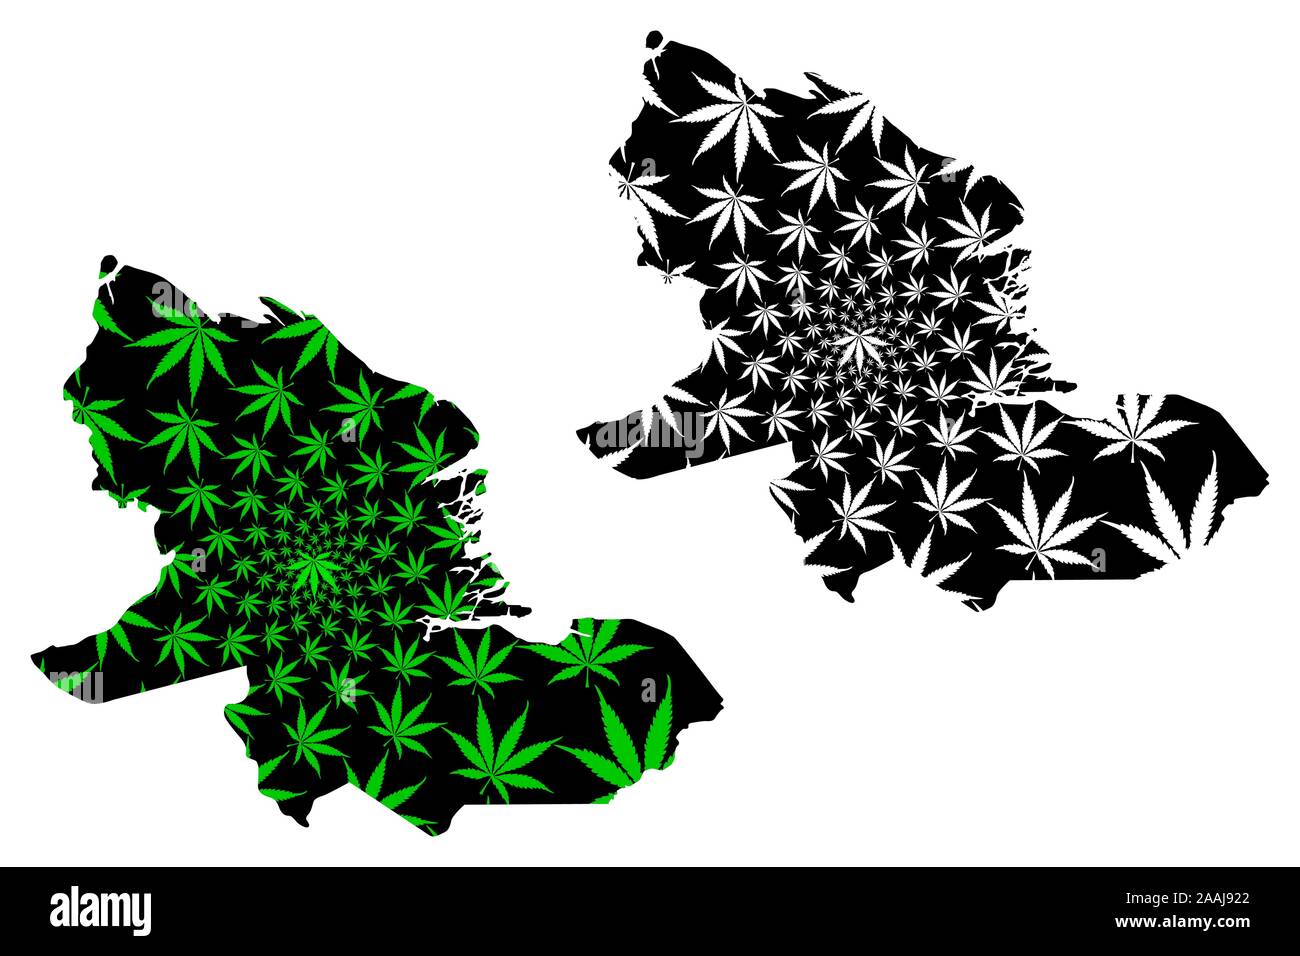 Delta Amacuro State (Bolivarian Republic of Venezuela) map is designed cannabis leaf green and black, Delta Amacuro map made of marijuana (marihuana,T Stock Vector